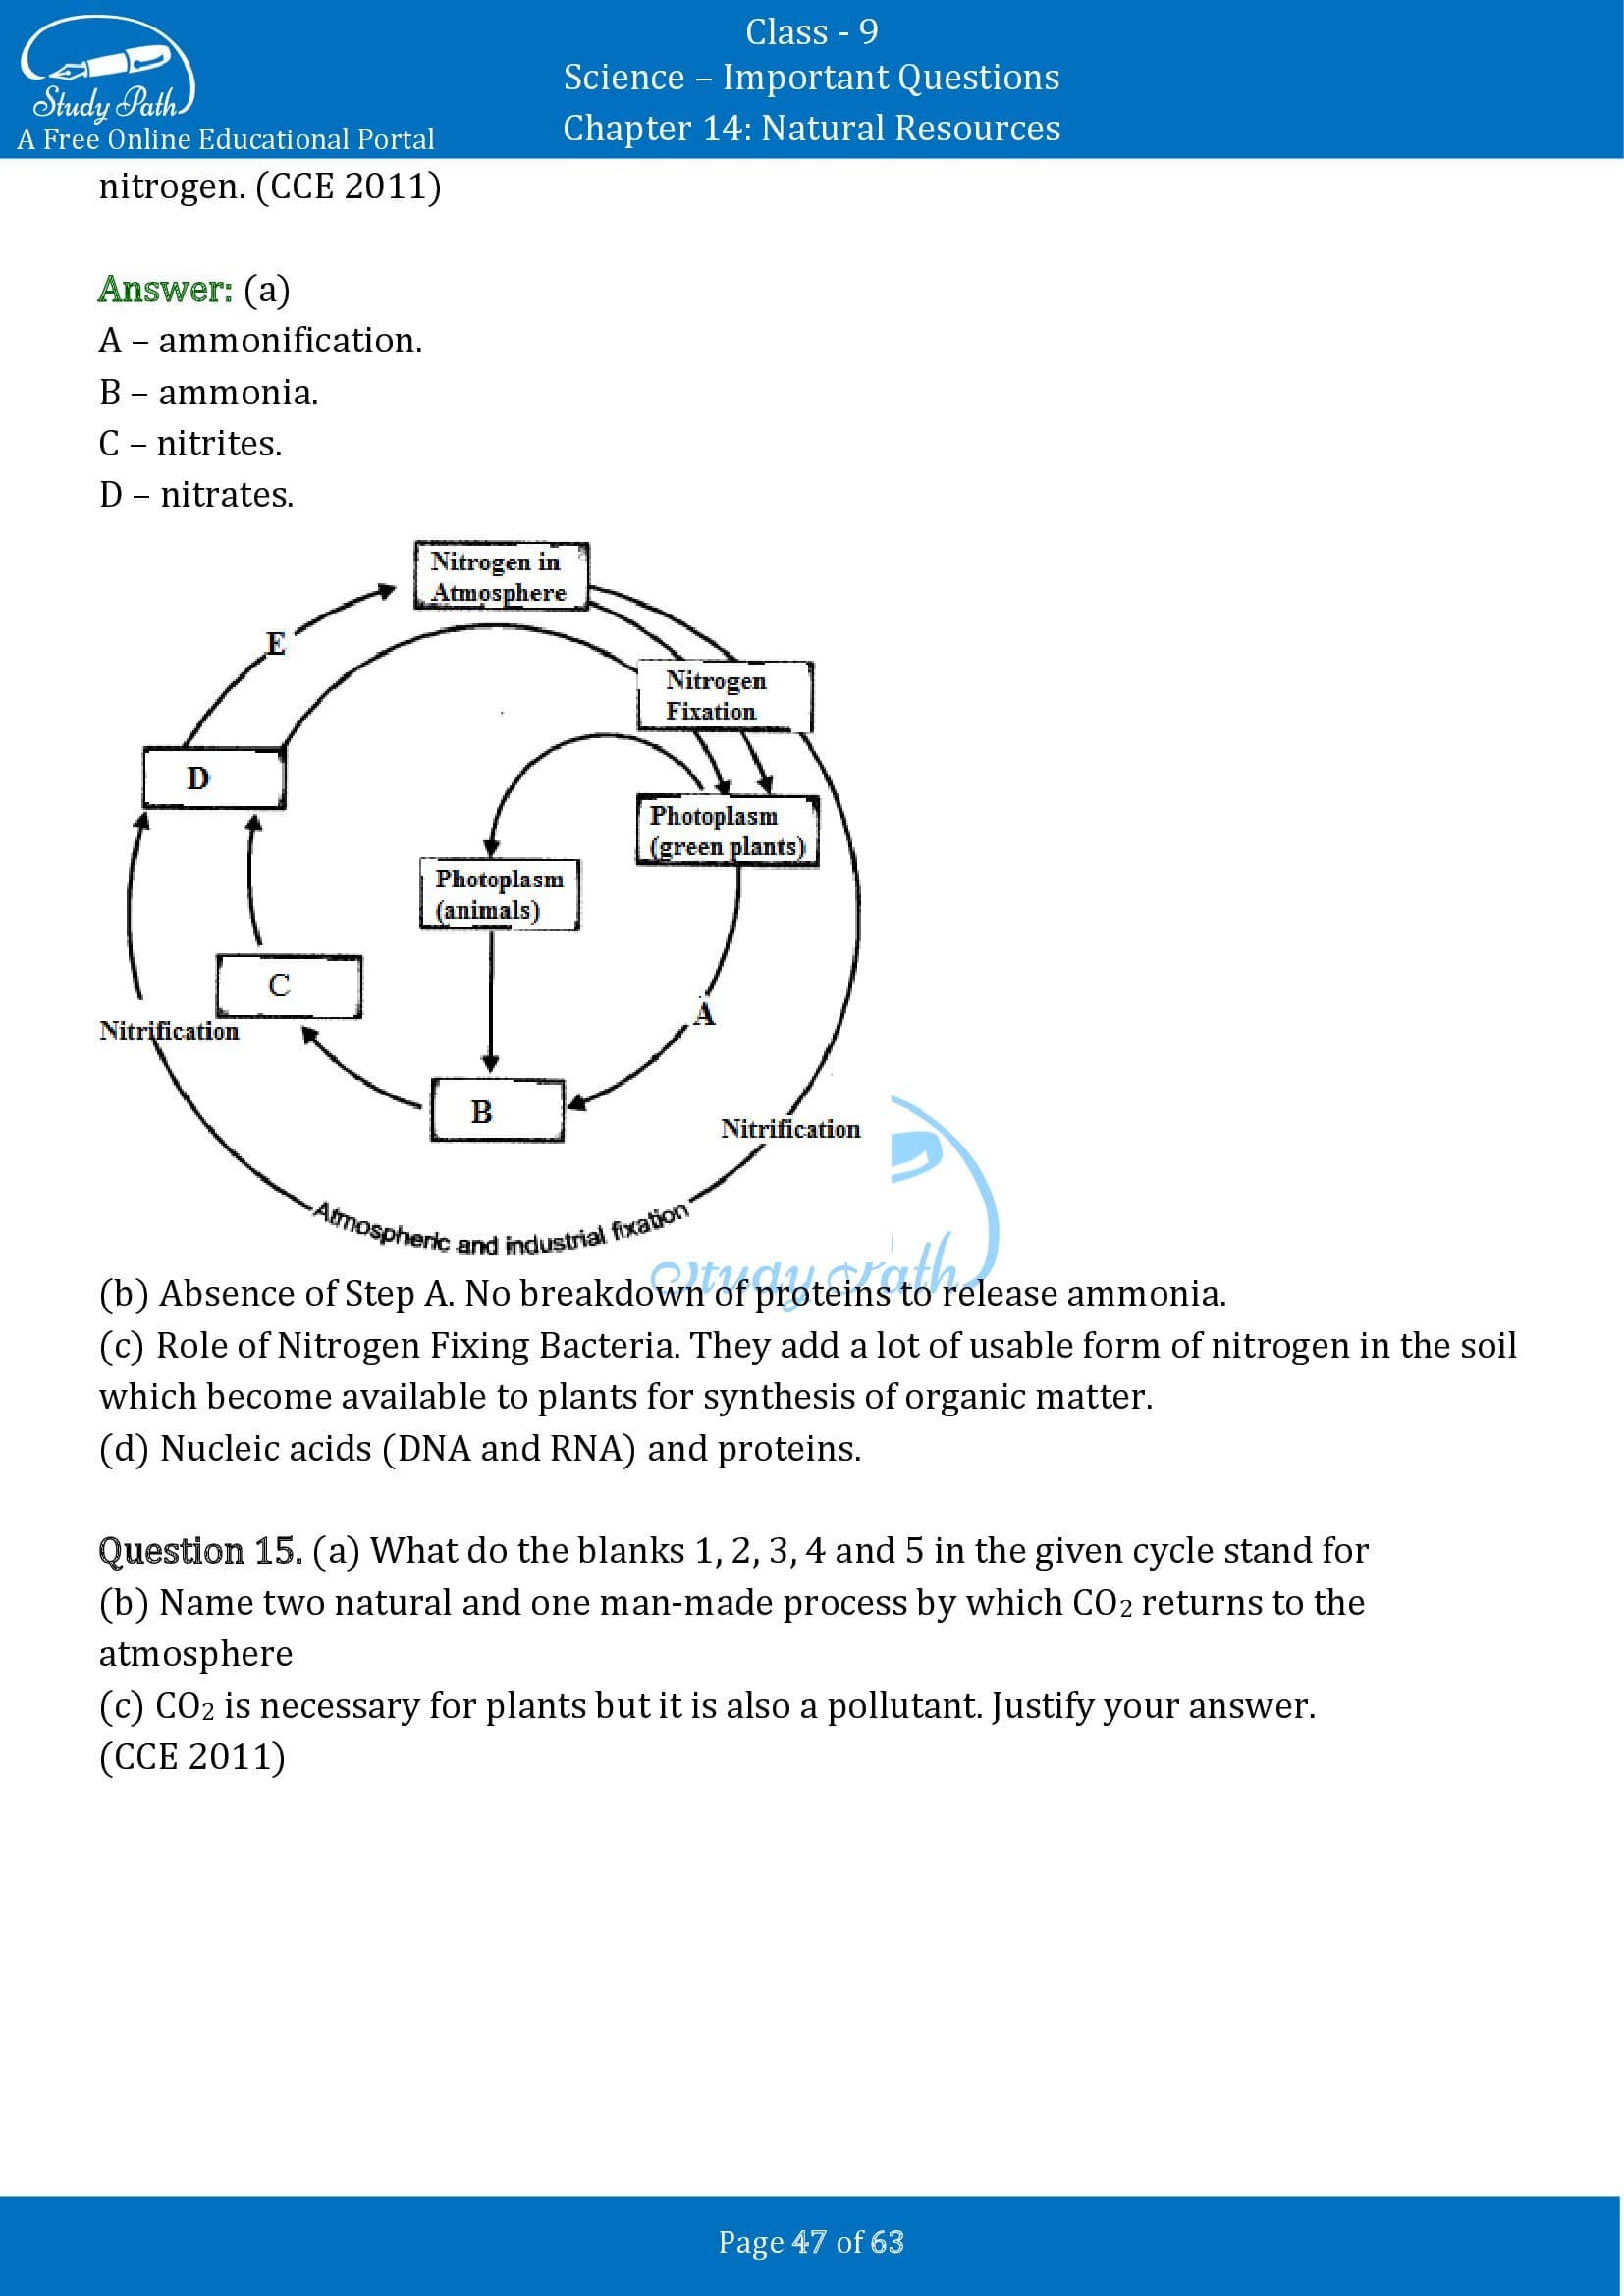 Important Questions for Class 9 Science Chapter 14 Natural Resources 00047